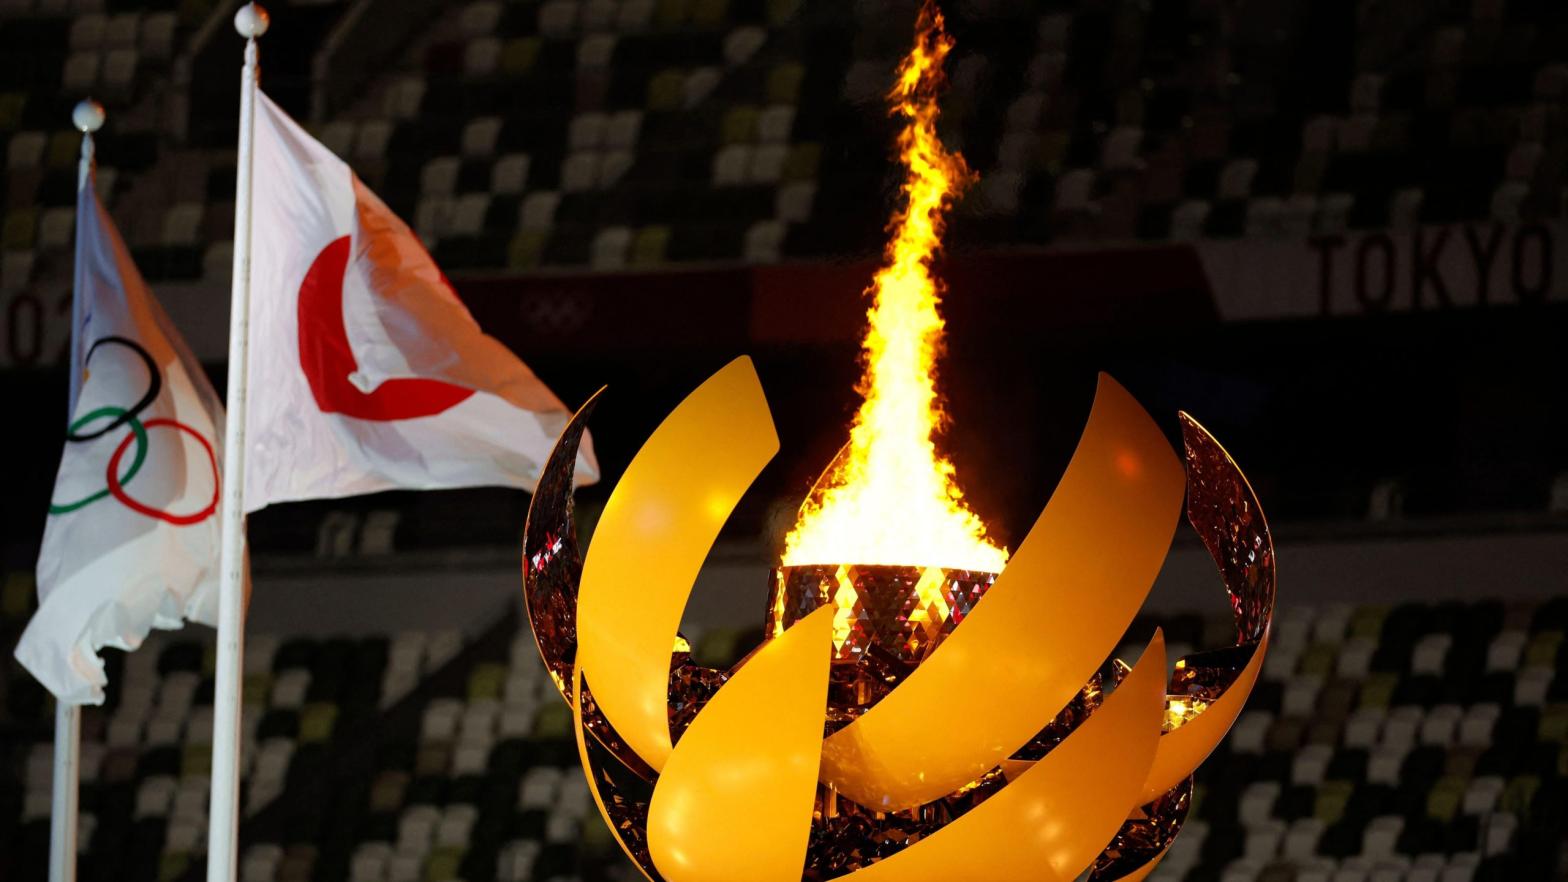 A picture shows the Olympic Flame and Cauldron next to the Japanese and Olympic flags during the opening ceremony of the Tokyo 2020 Olympic Games, (Photo: Odd Andersen / AFP, Getty Images)